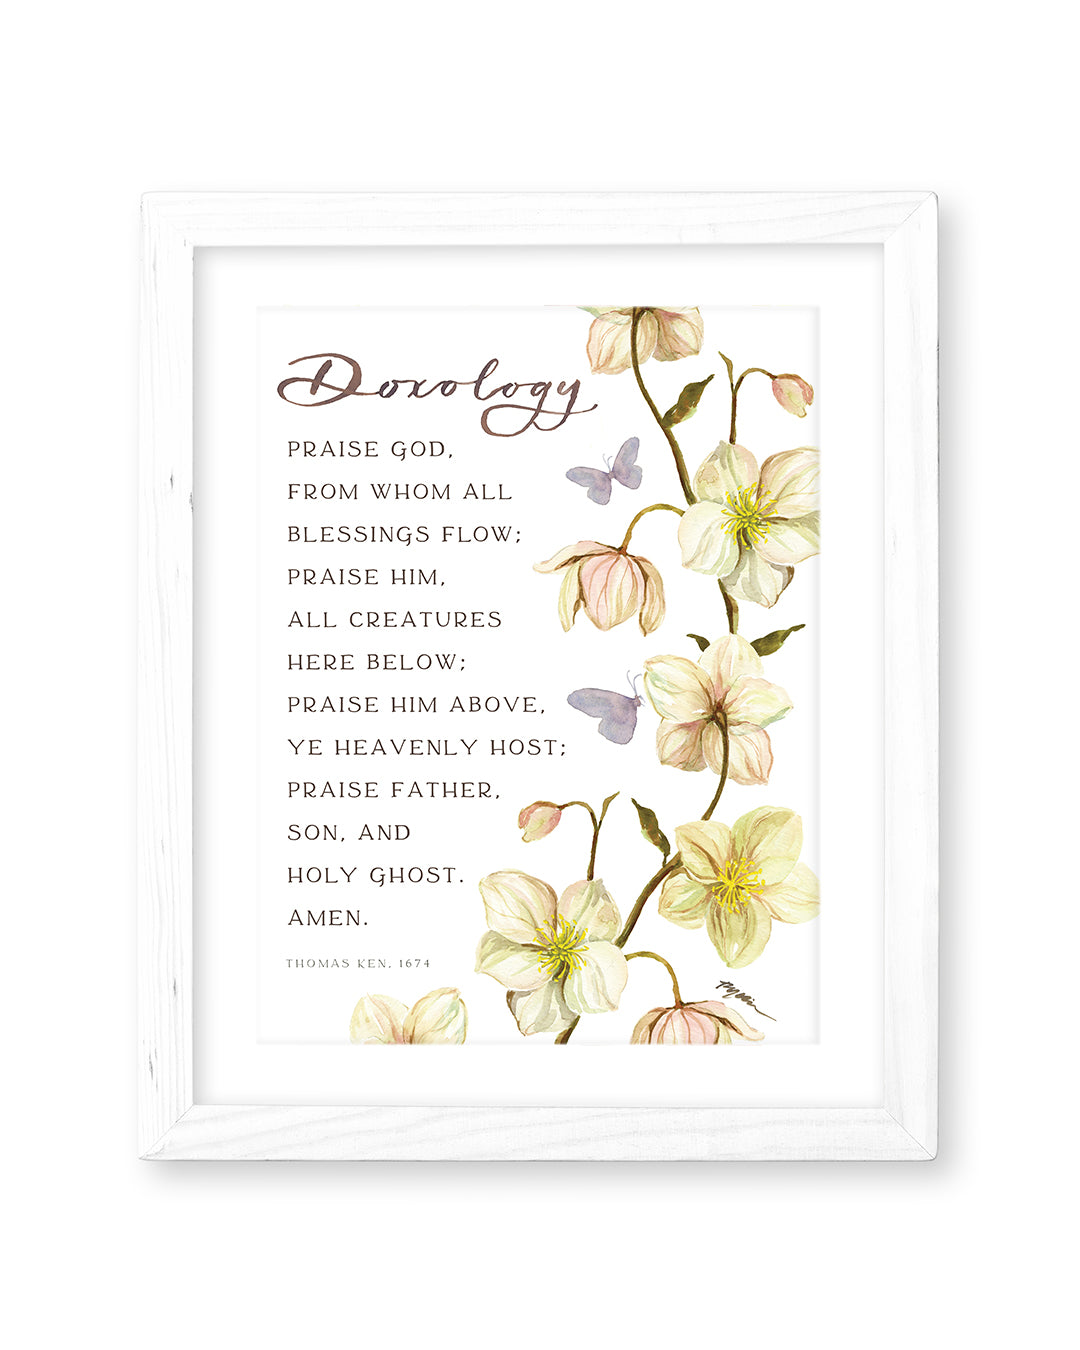 doxology Christian art print-praise God from whom all blessing flow